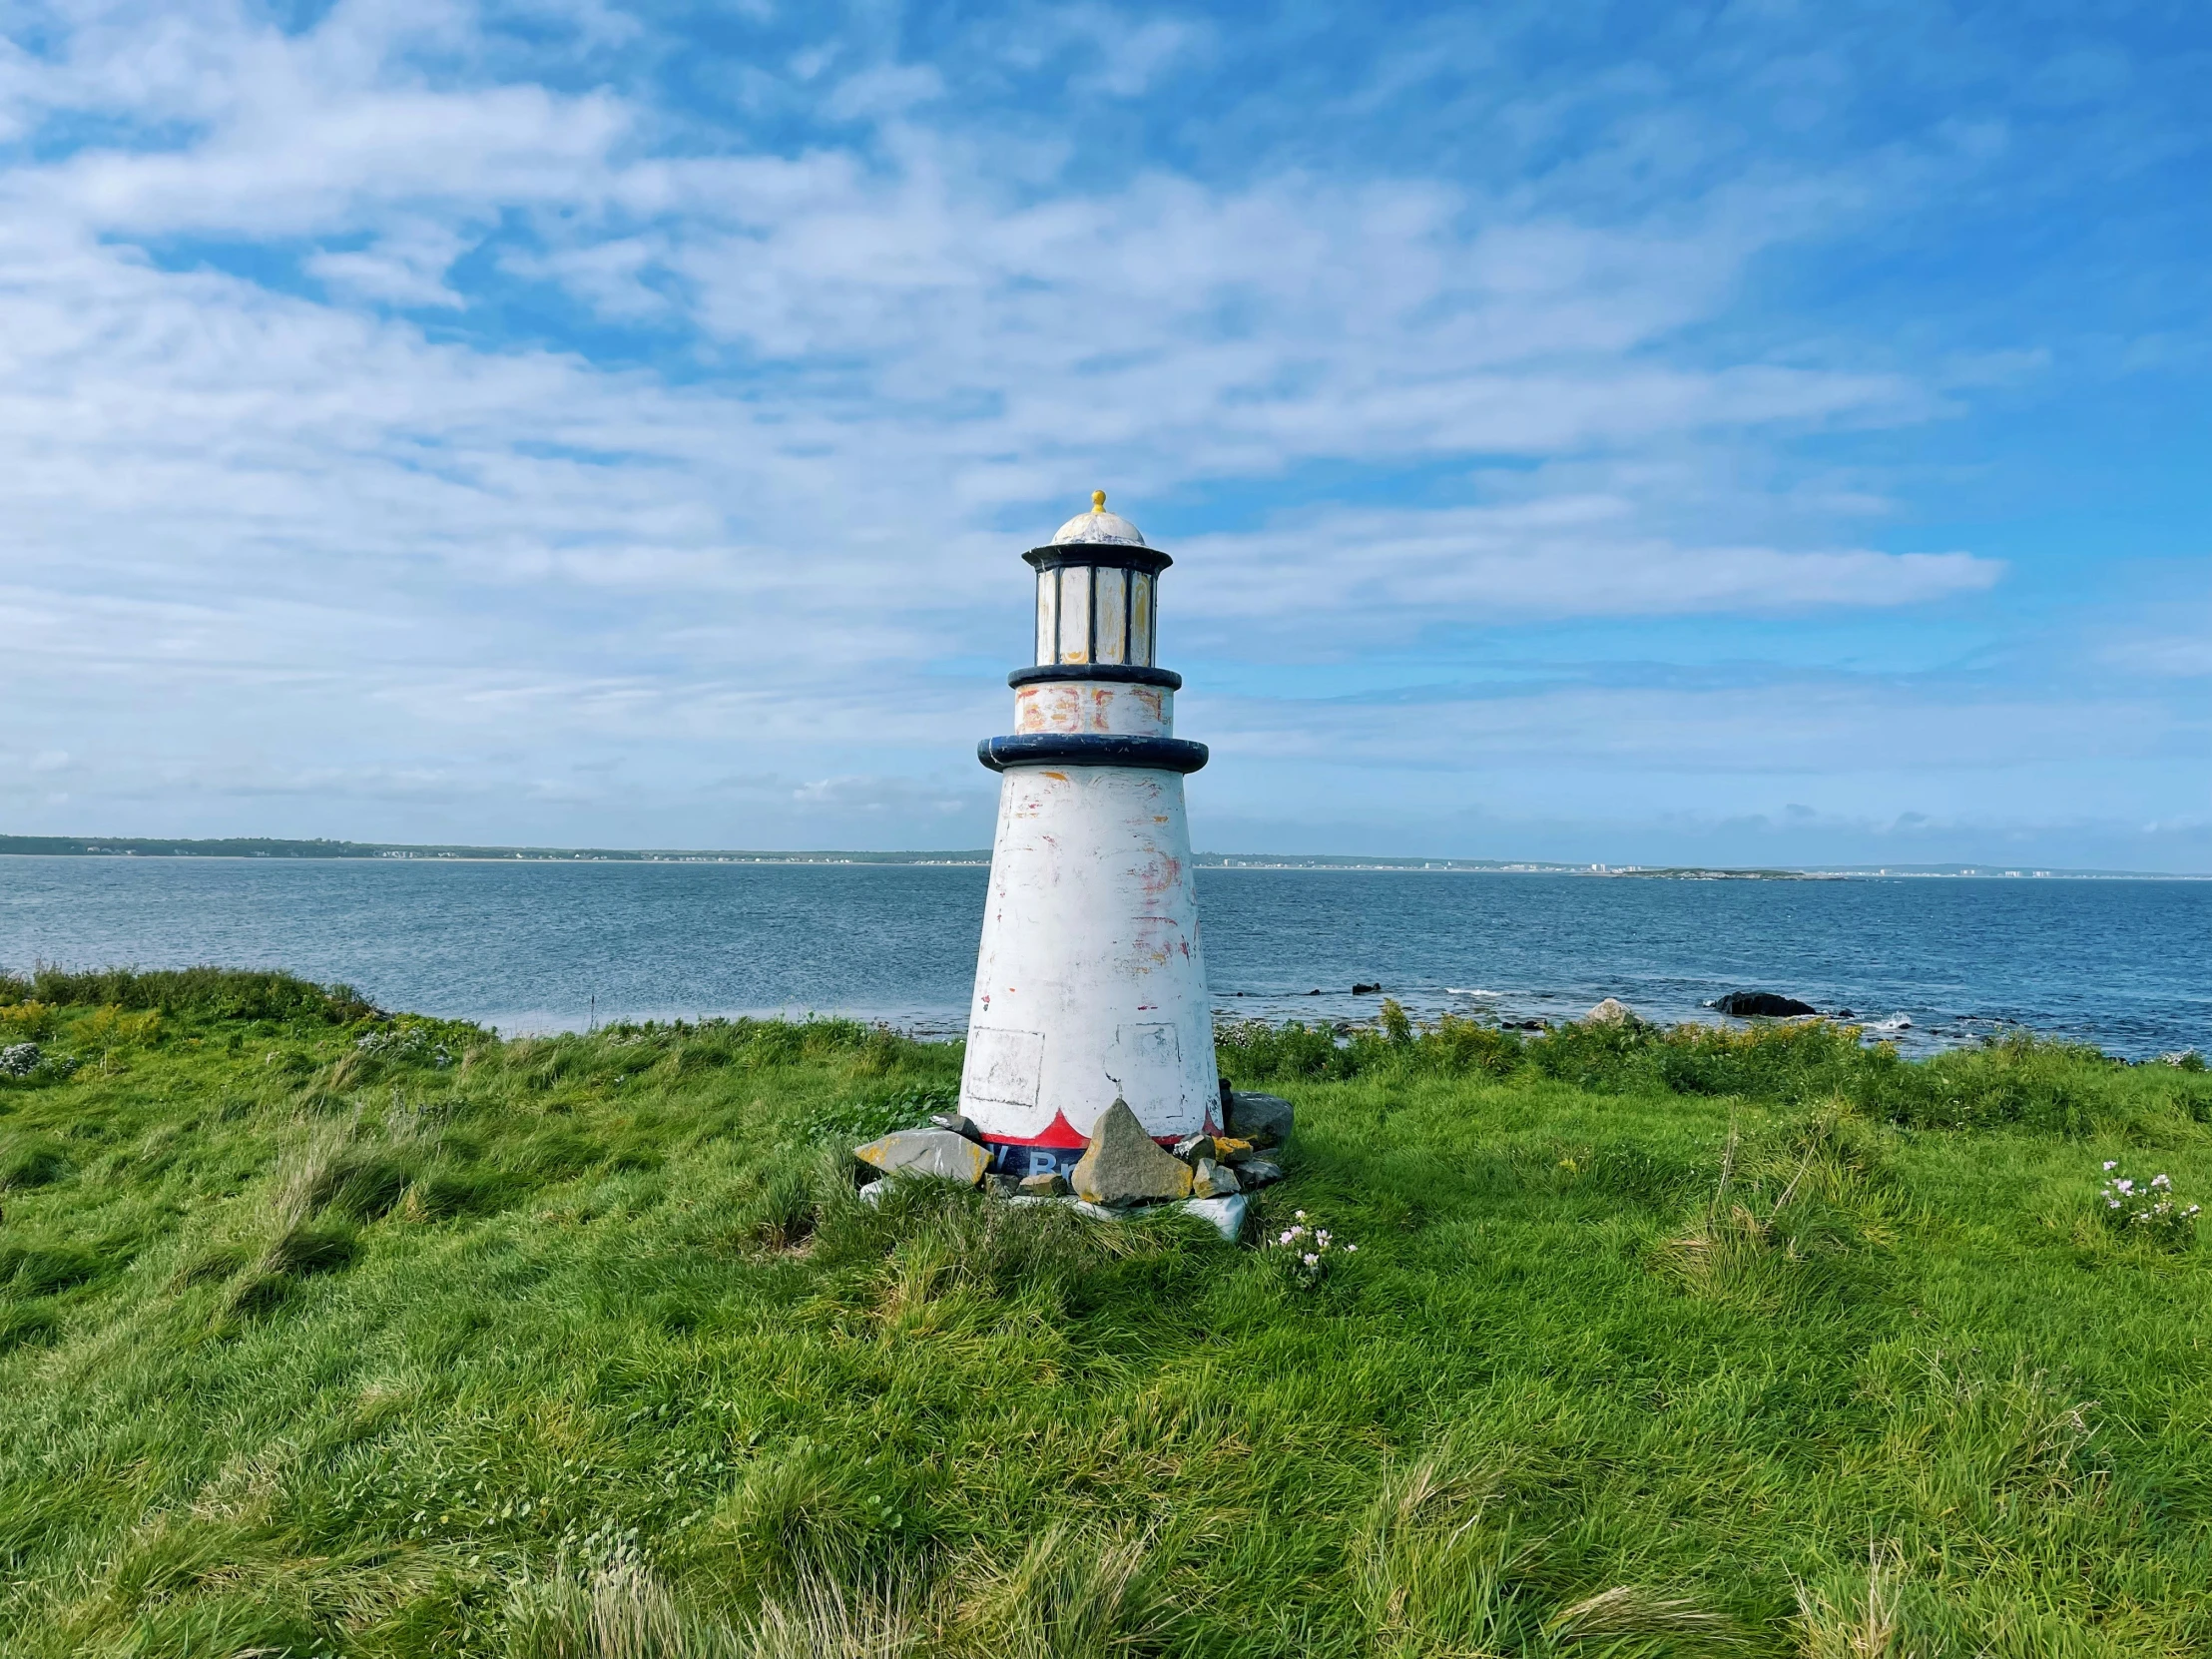 the tall light house is on top of grass near the water